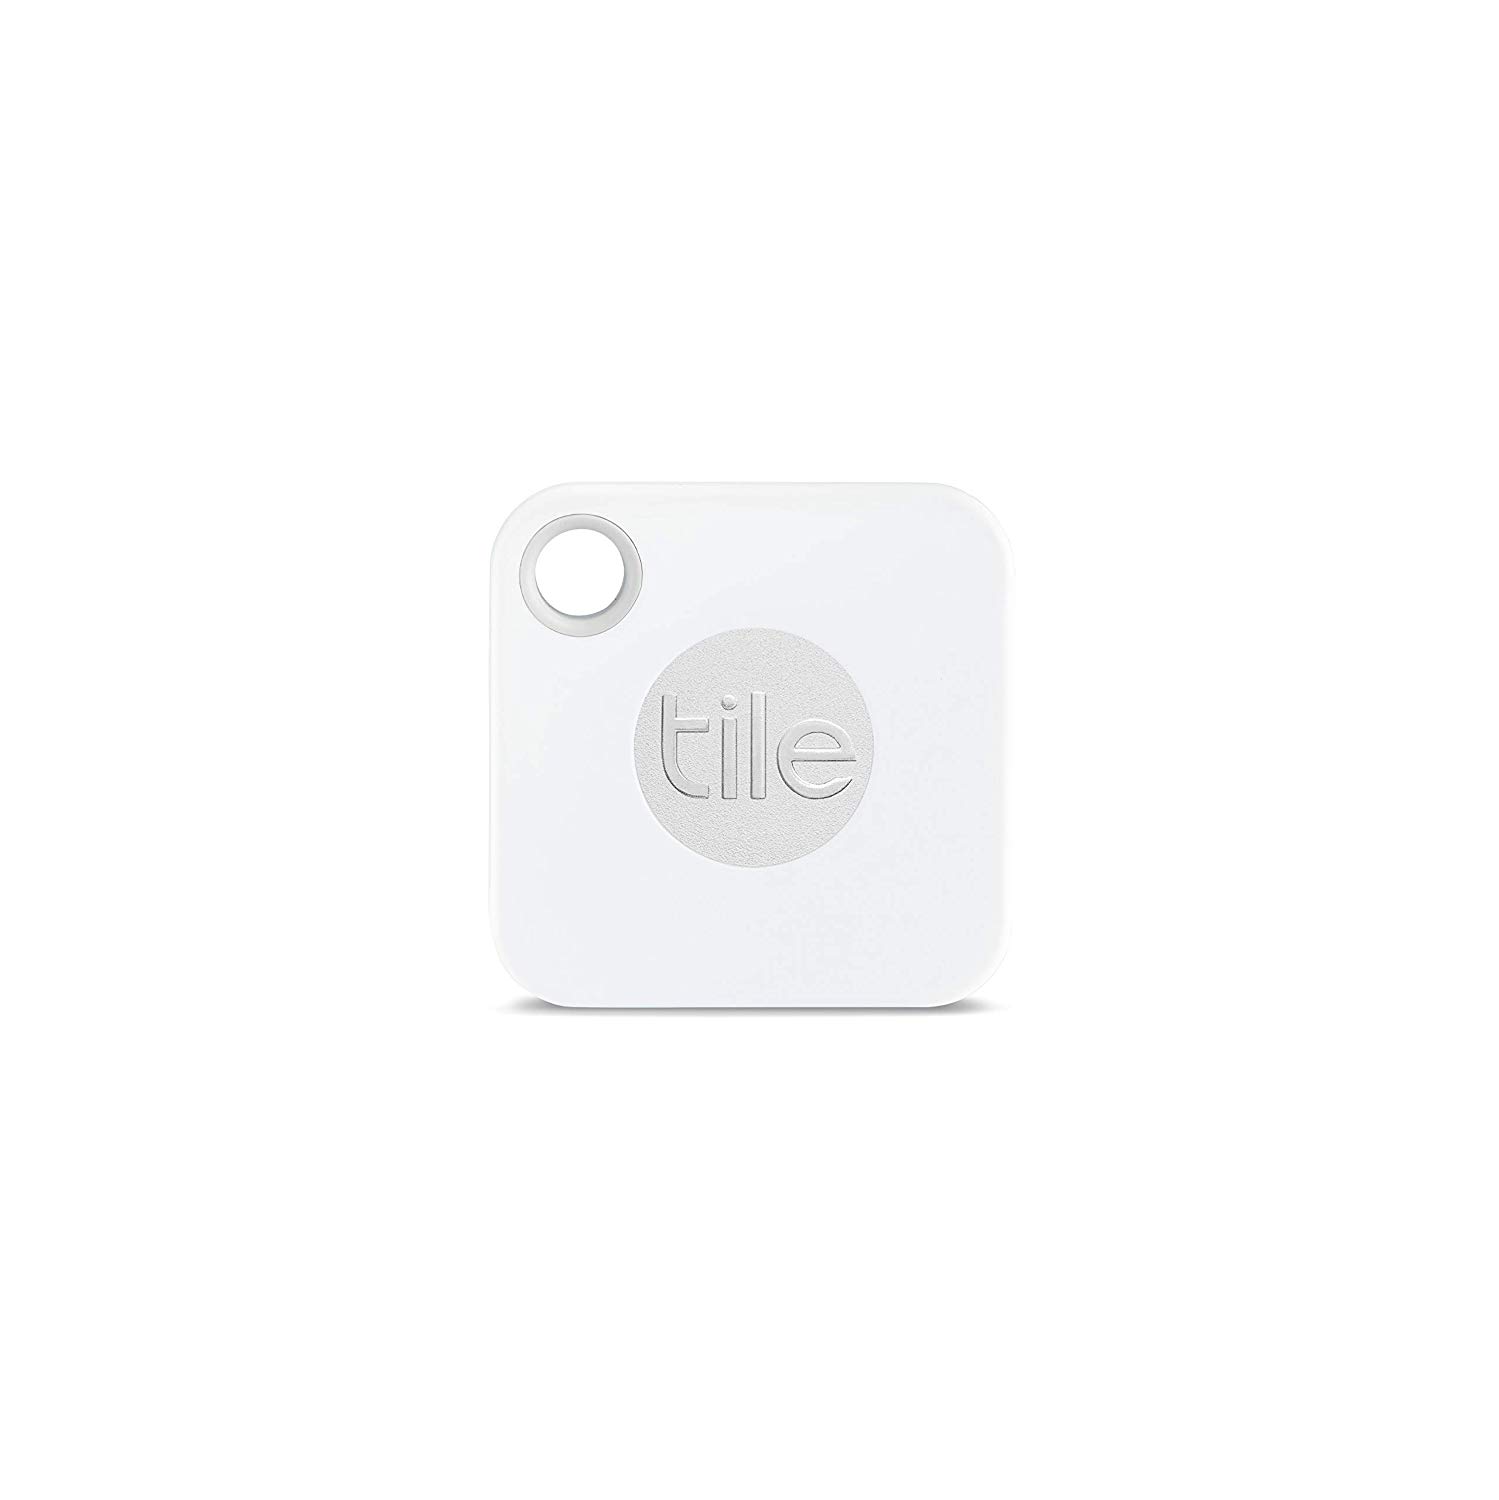 Photo of a white Tile Mate